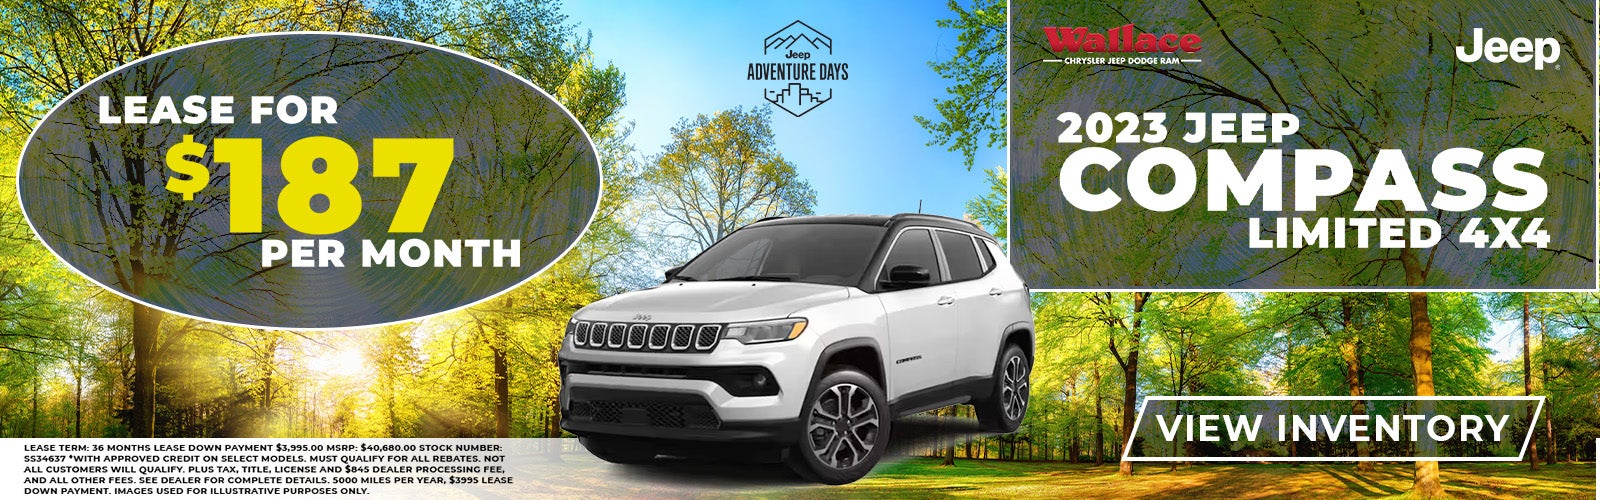 Jeep Compass Special Offer